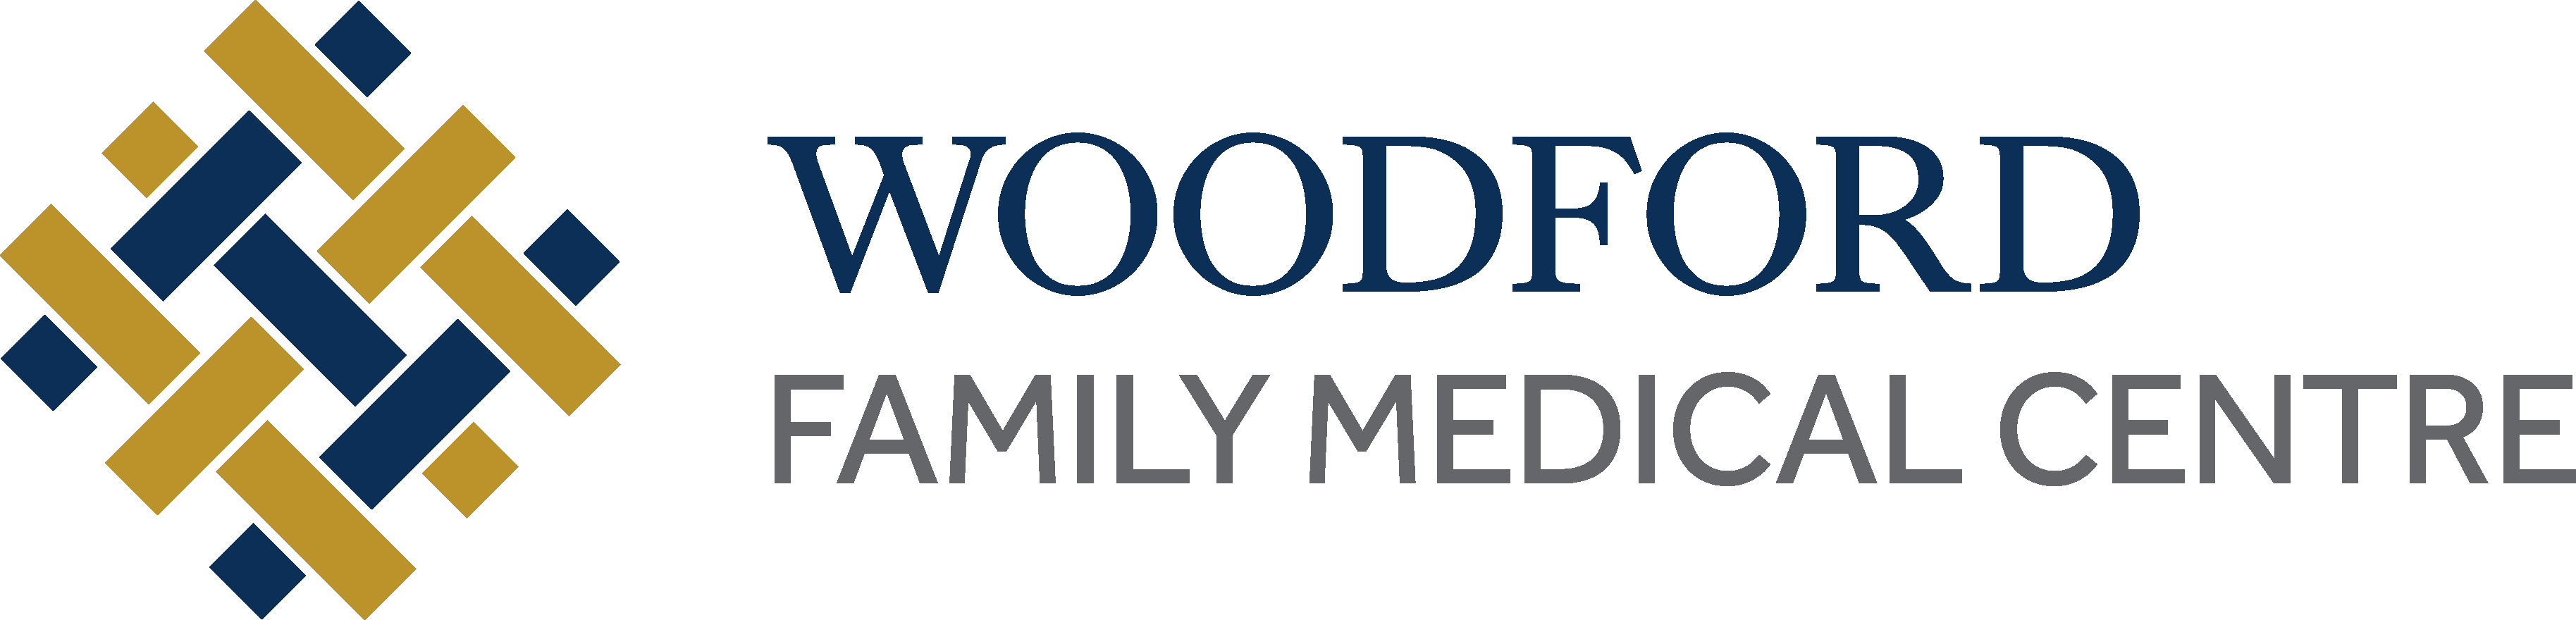 Woodford Family Medical Centre